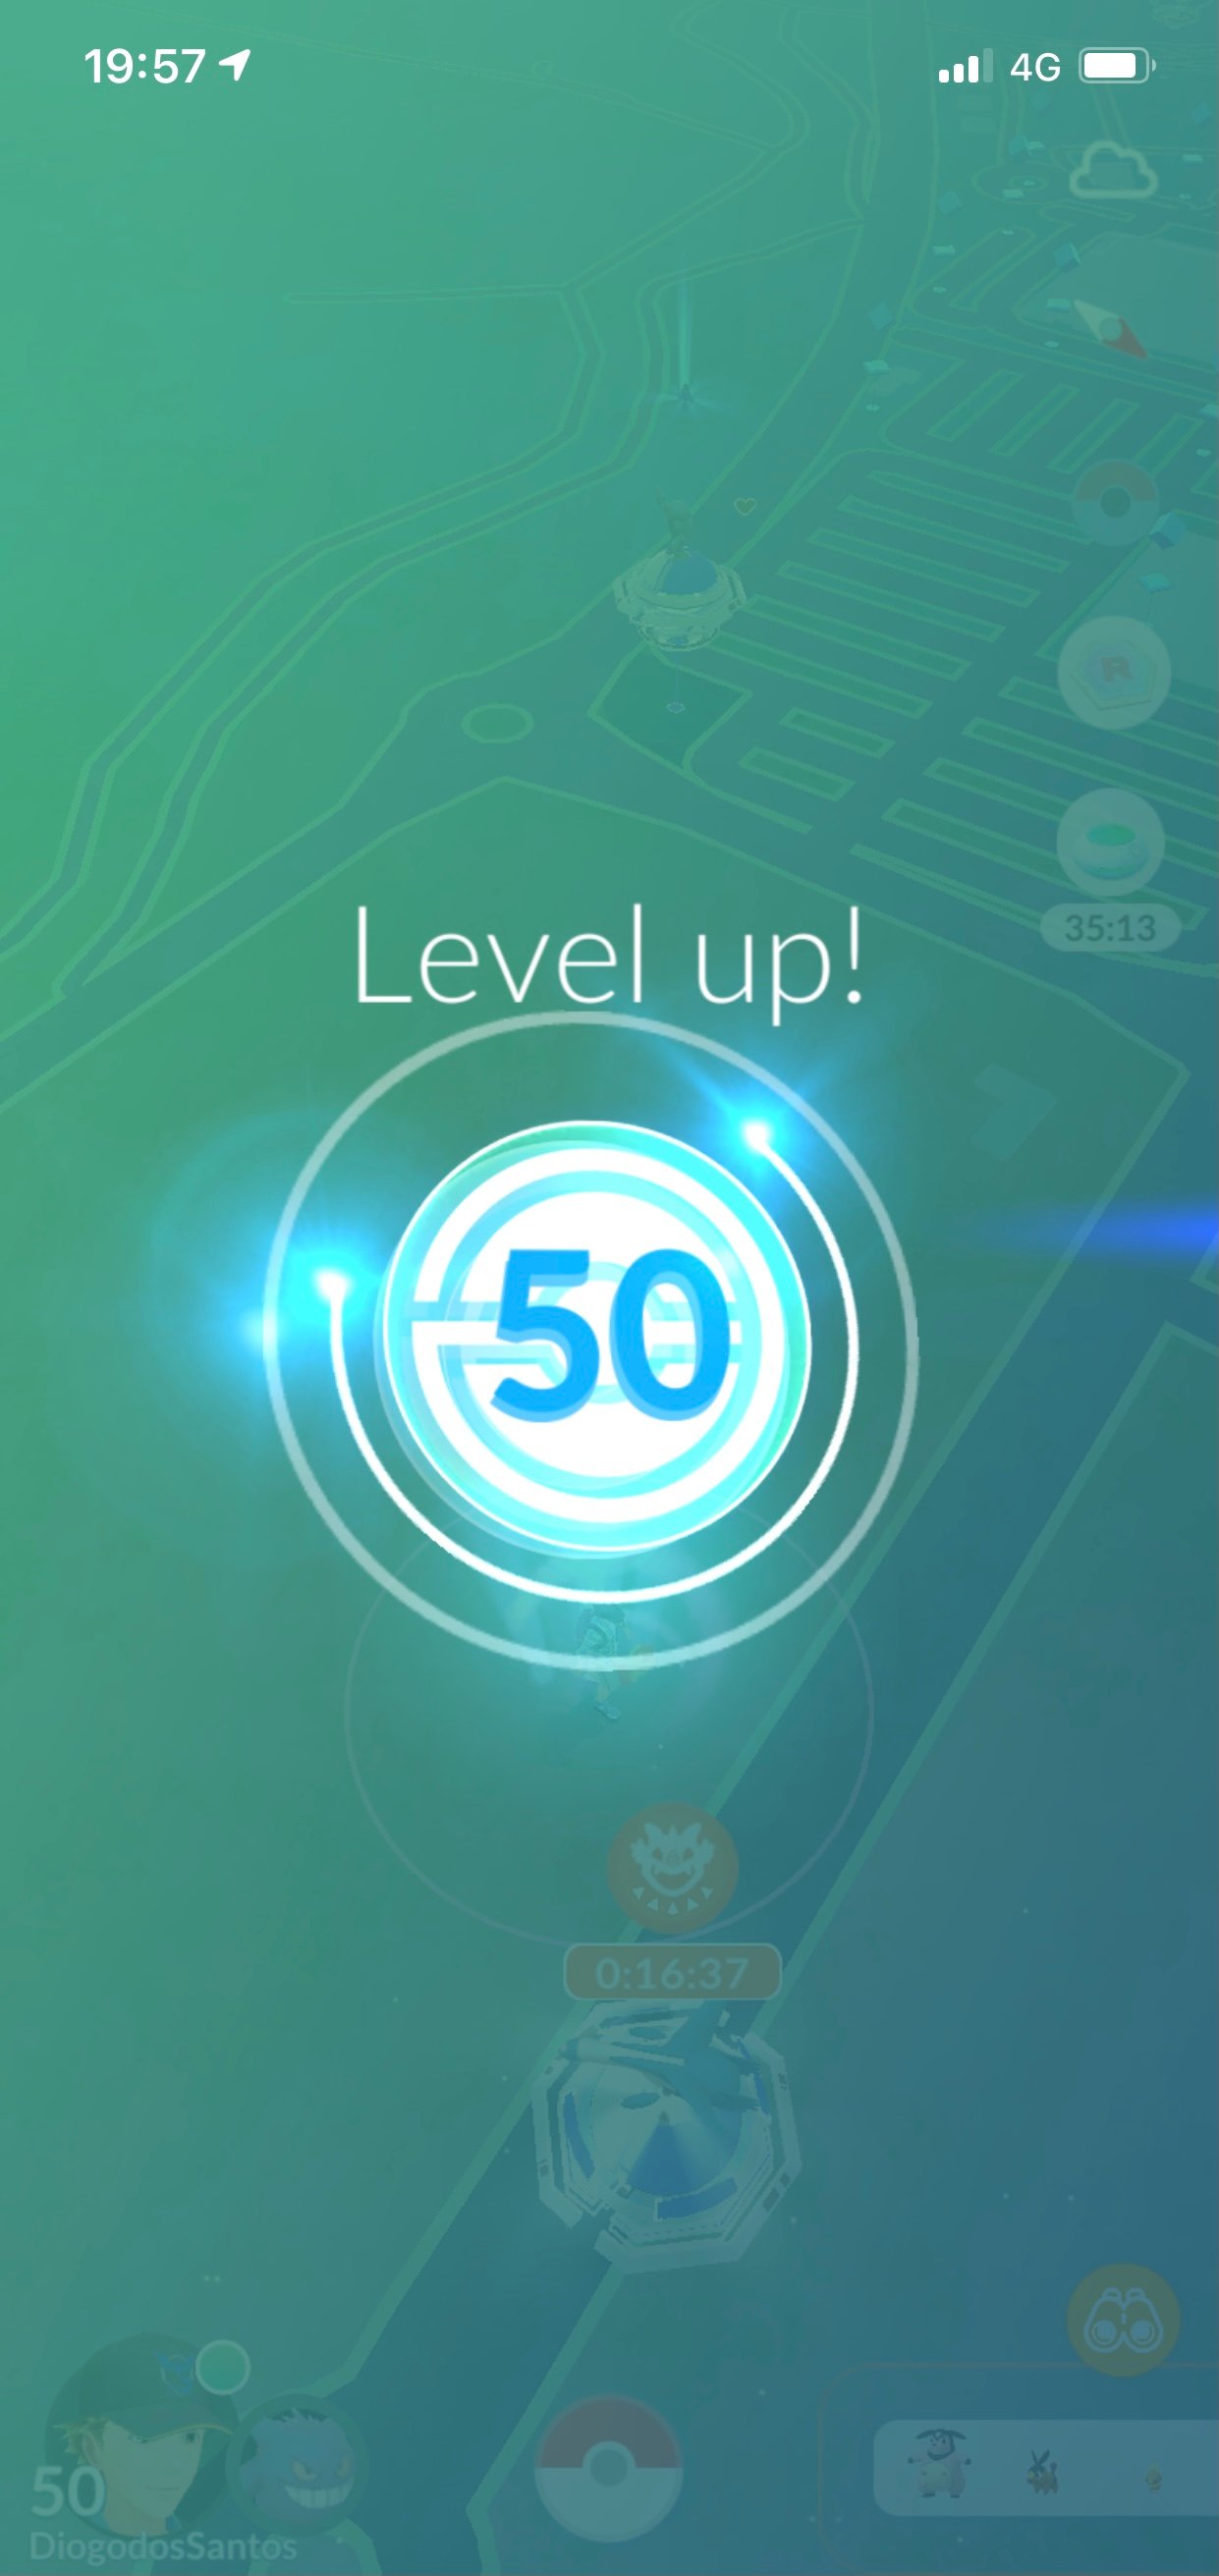 Road to level 50 - An experience to remember